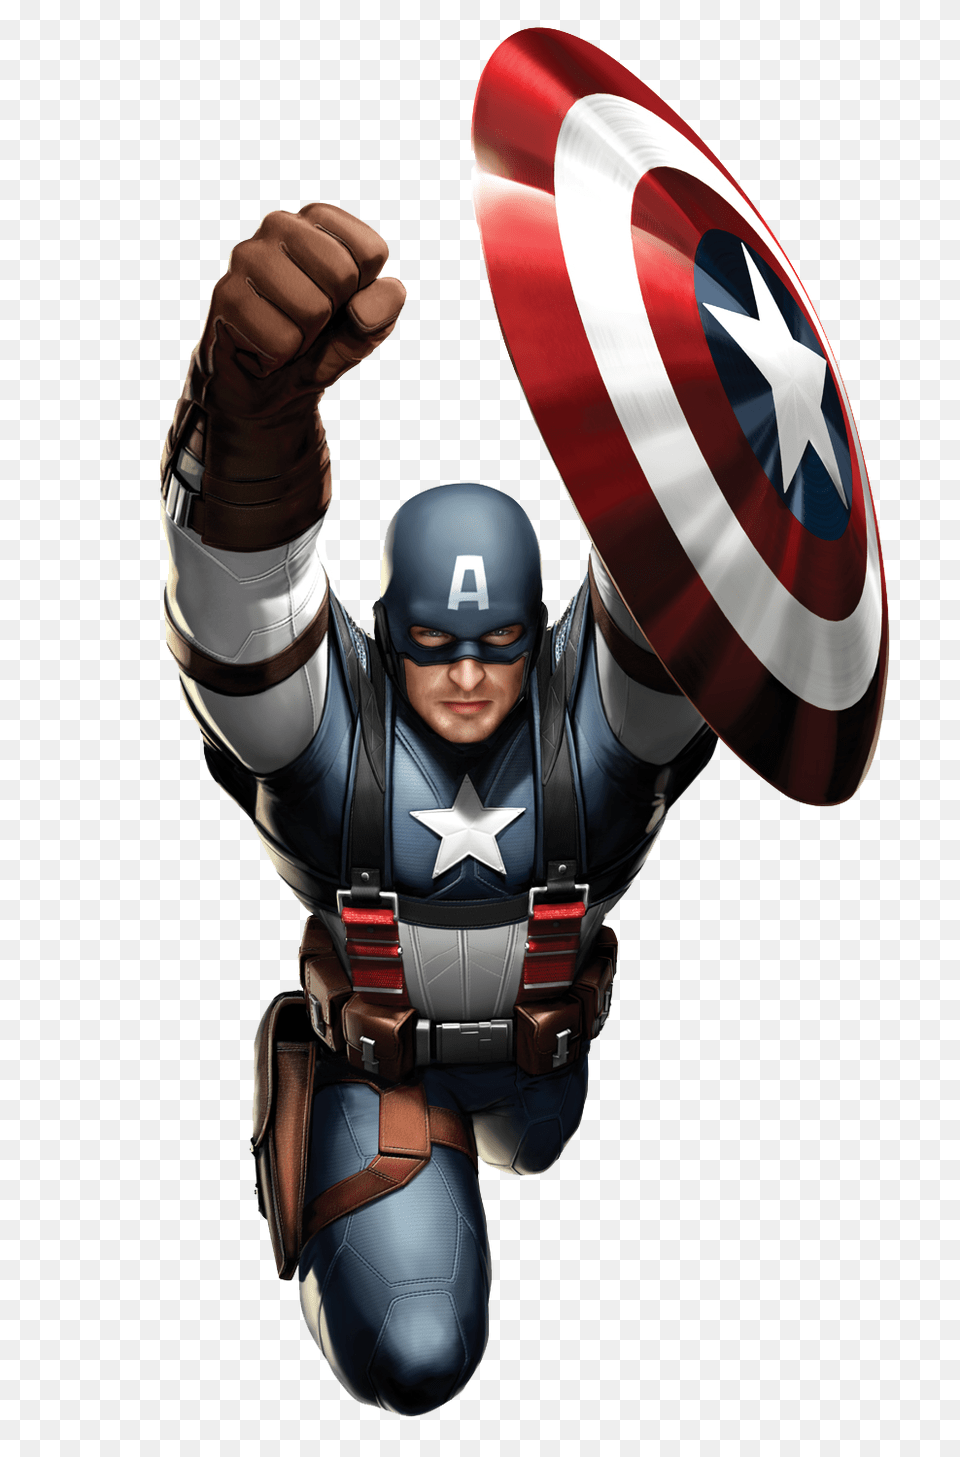 Captain America Images, Glove, Clothing, Armor, Man Png Image